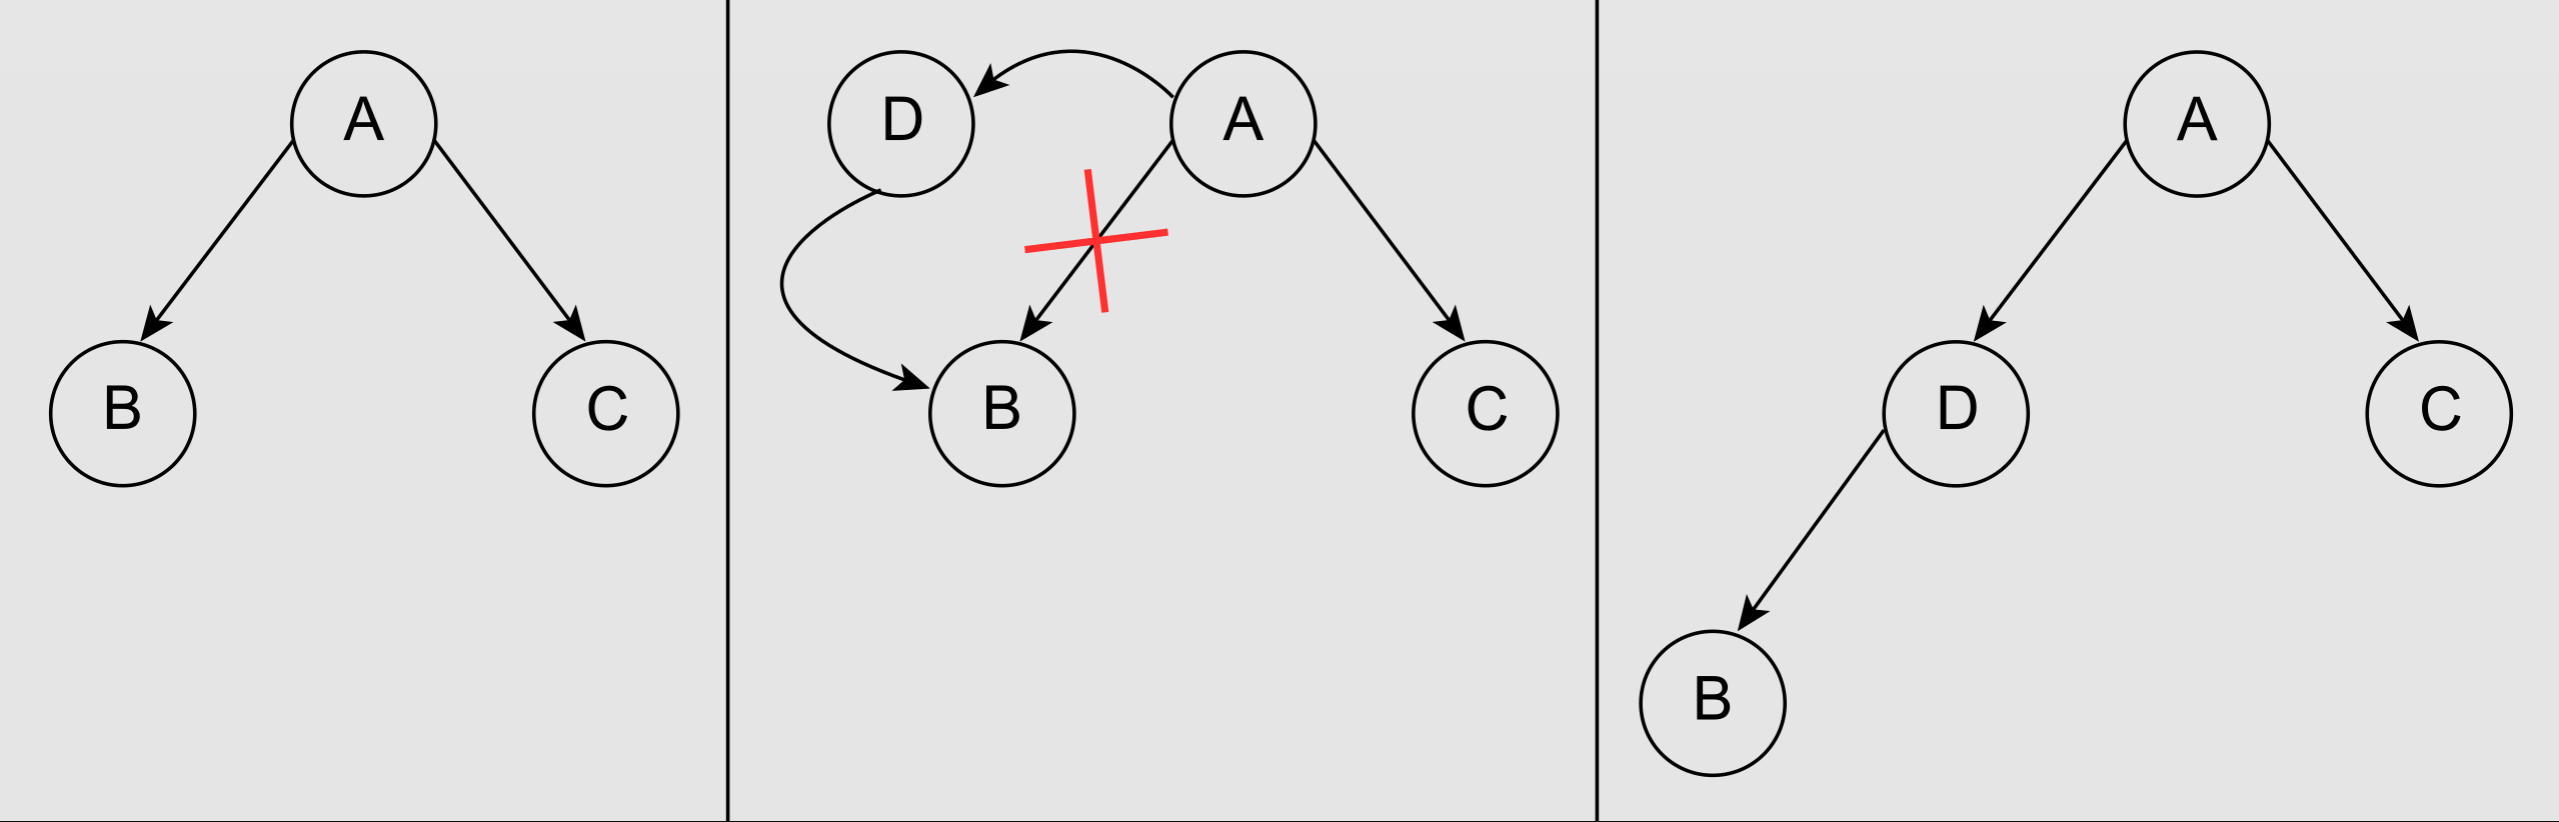 The process of inserting a node into a binary tree